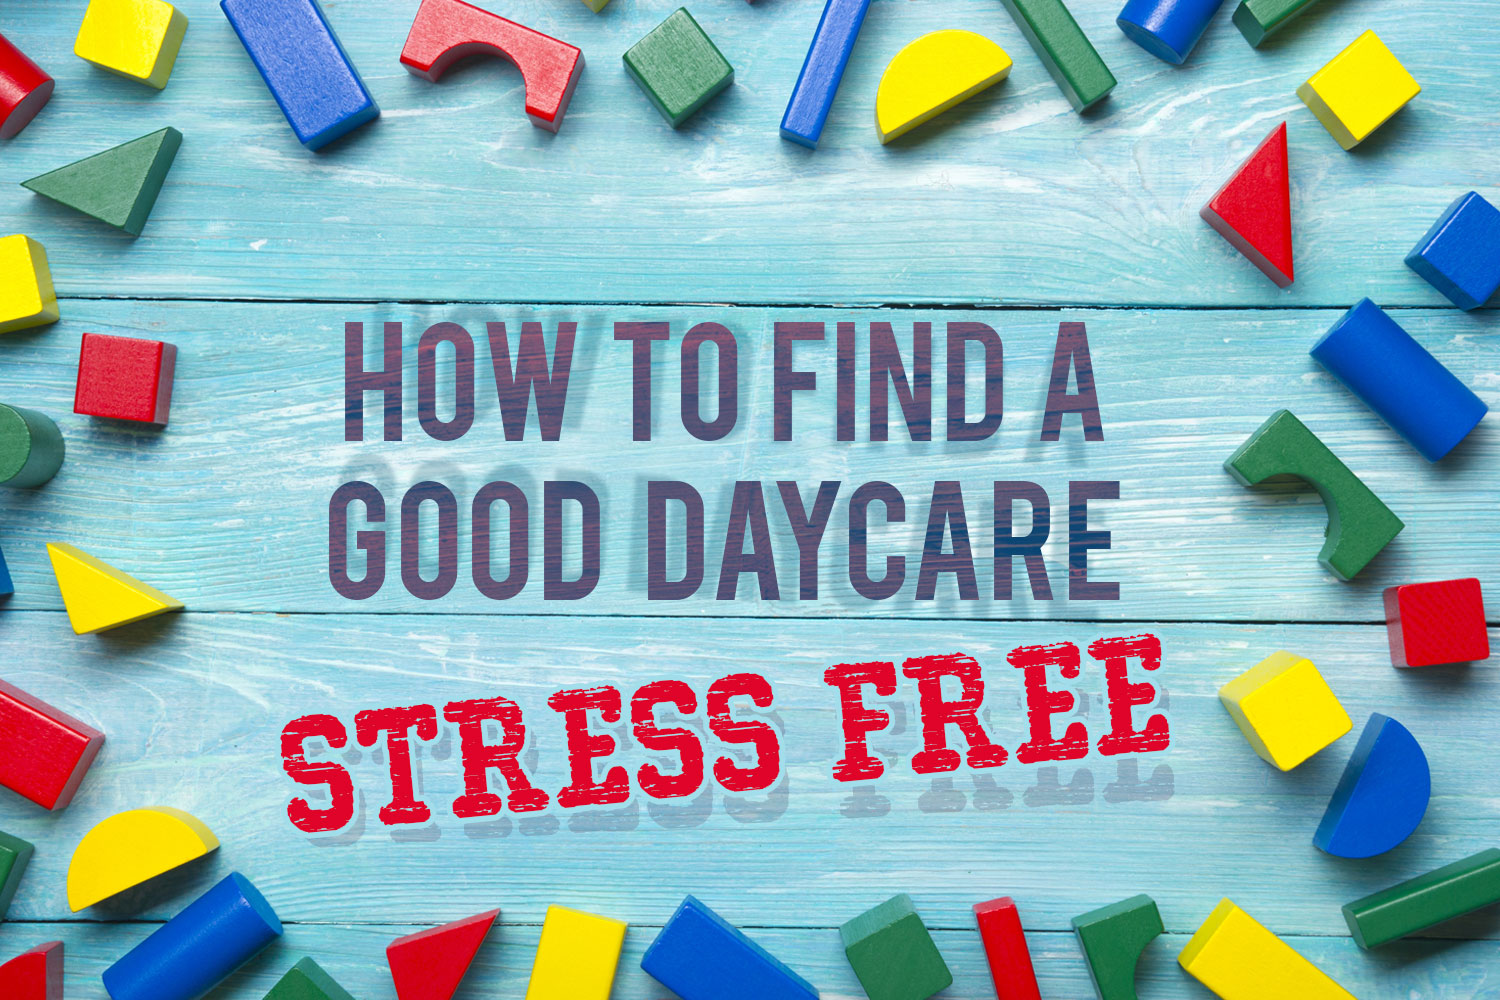 How to Find a Good Daycare Without the Stress